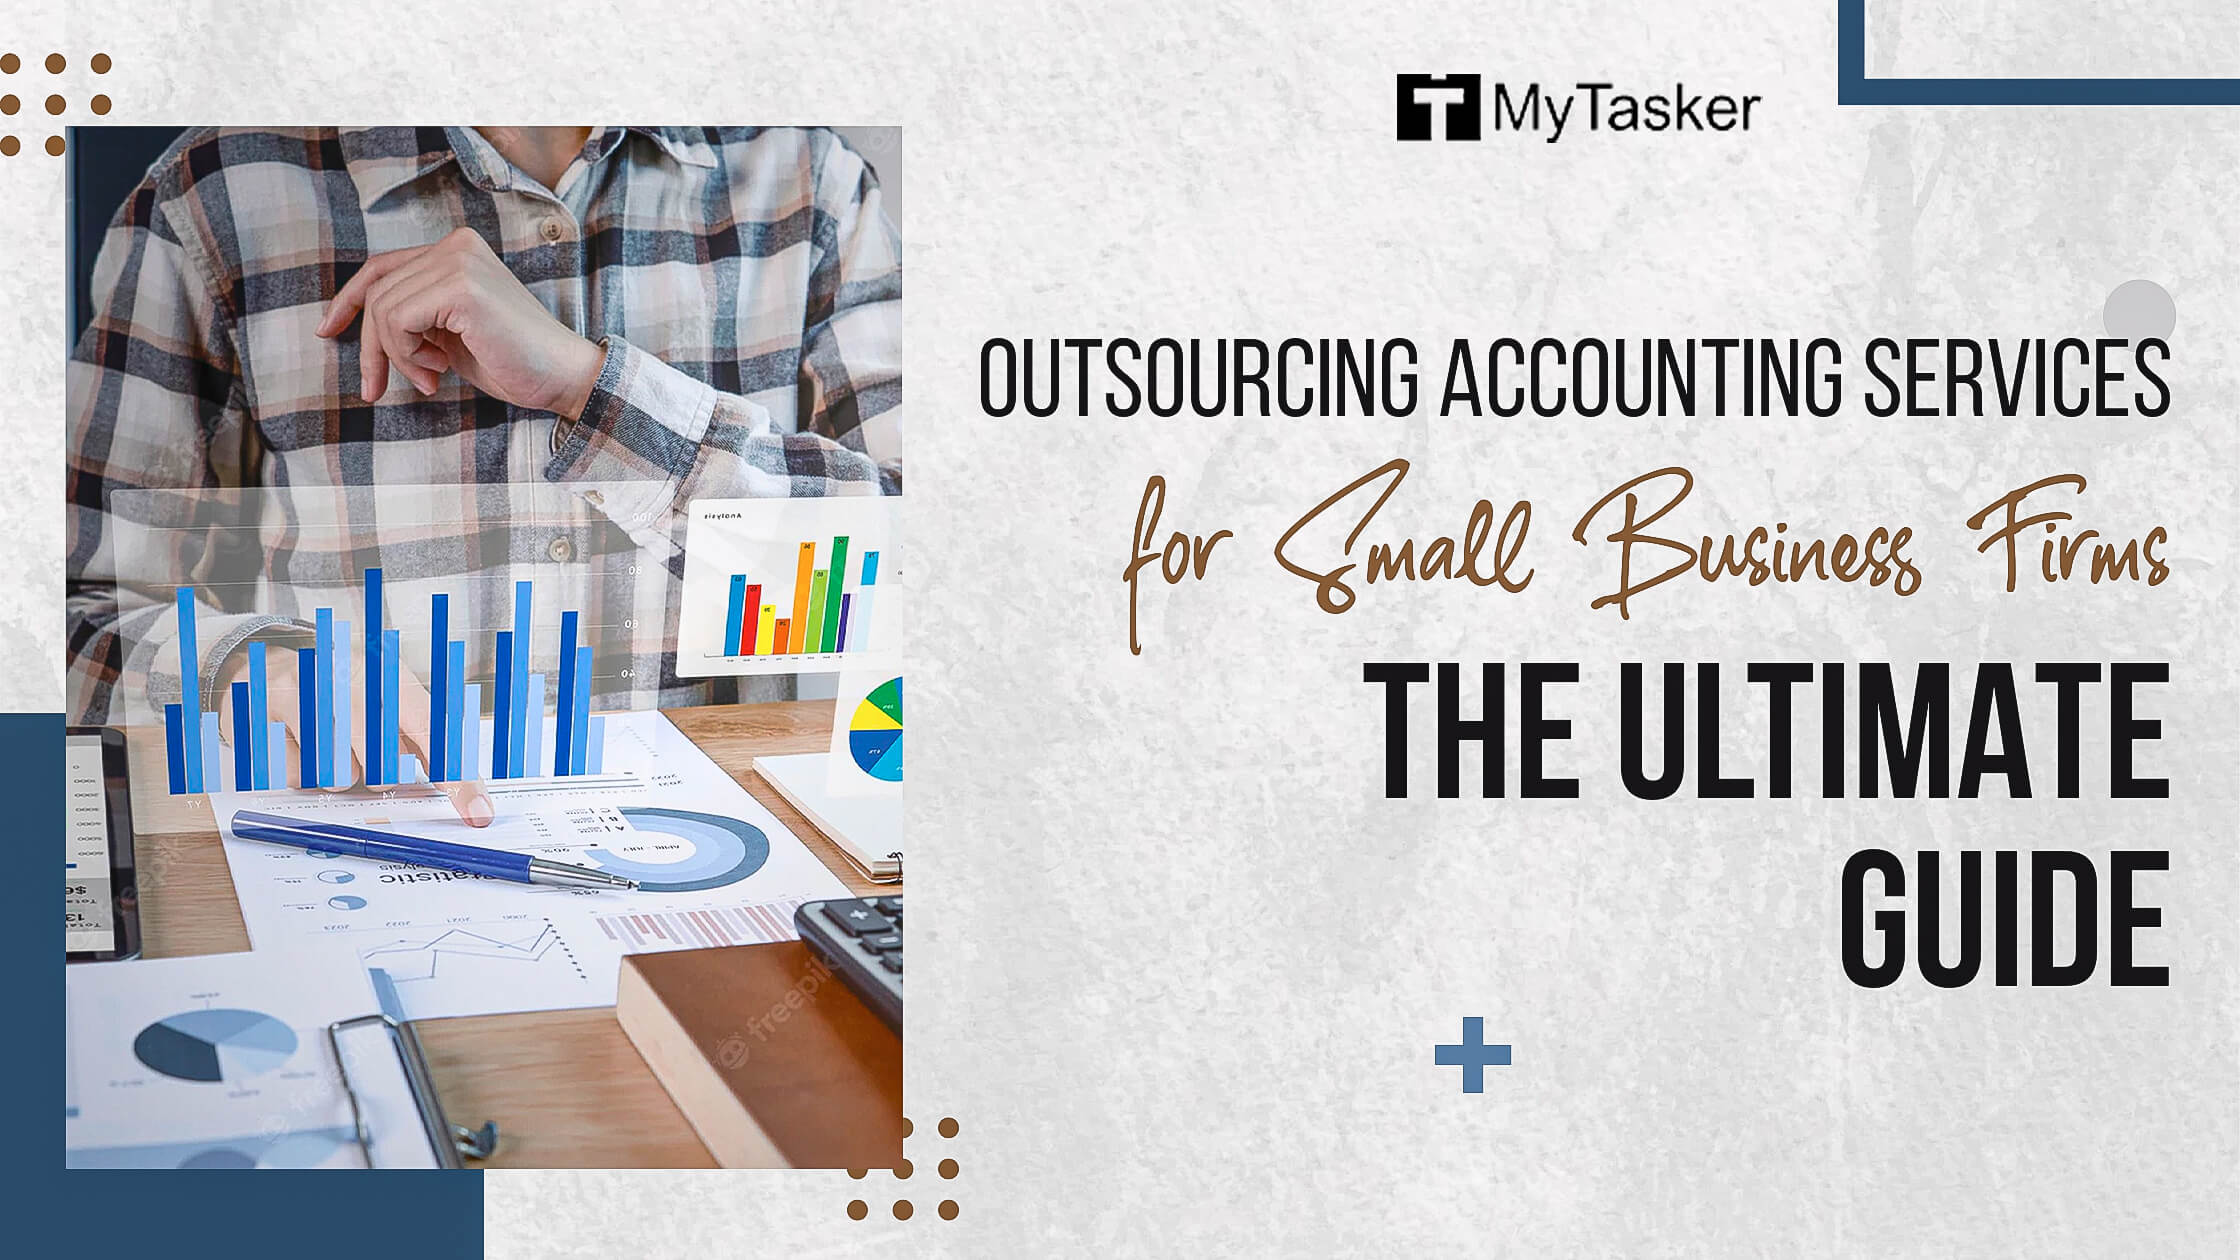 Outsourcing Accounting Services for Small Business Firms: The Ultimate Guide